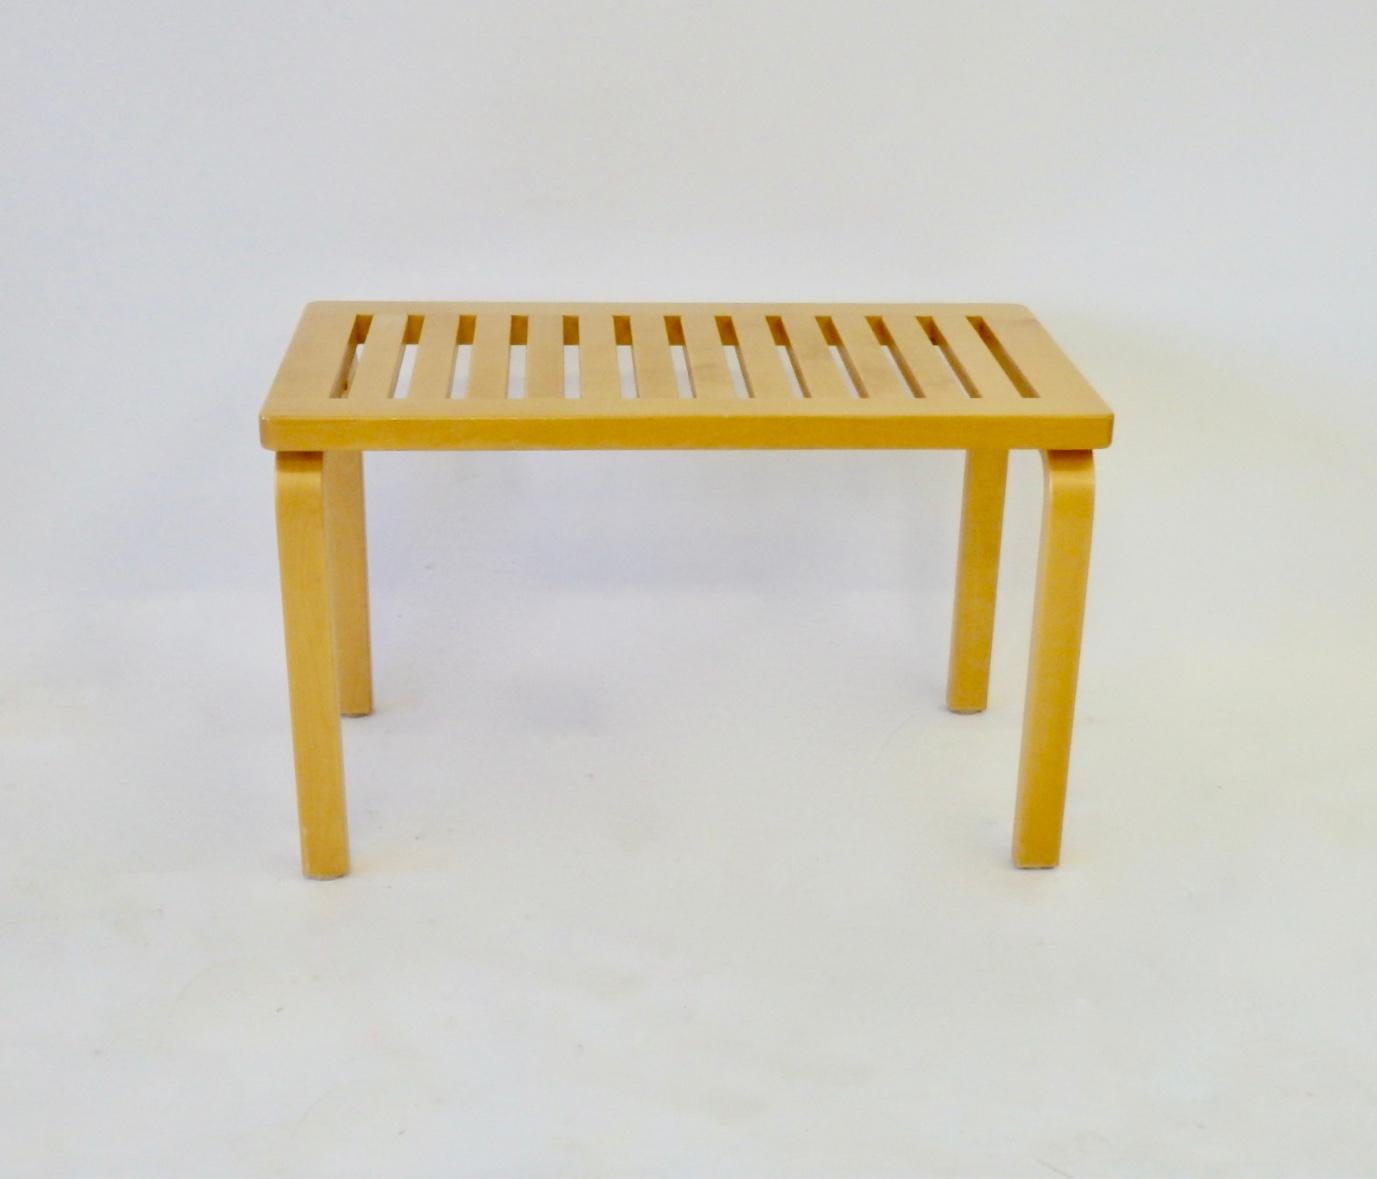 Original finish Aalto bench manufactured by Artek. Ask about discounted shipping with legs removed. As originally shipped.